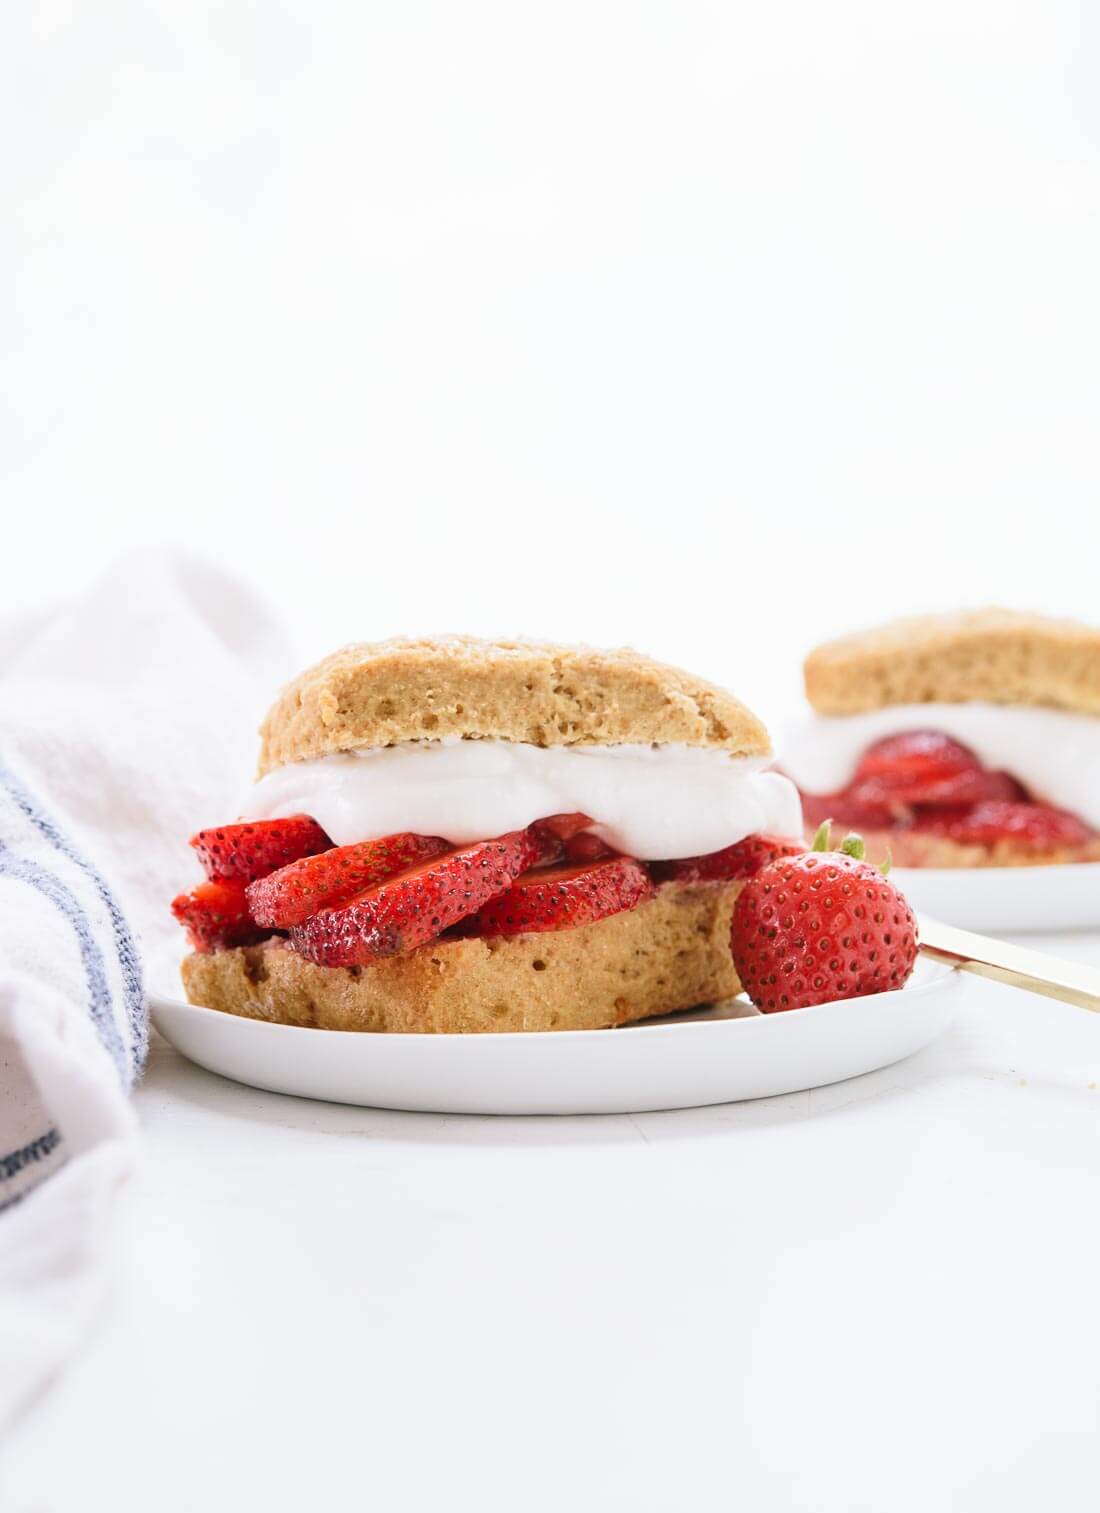 This healthier strawberry shortcake recipe is naturally sweetened, 100% whole grain and made with coconut milk instead of heavy cream! It's delicious and easy to make, too. cookieandkate.com